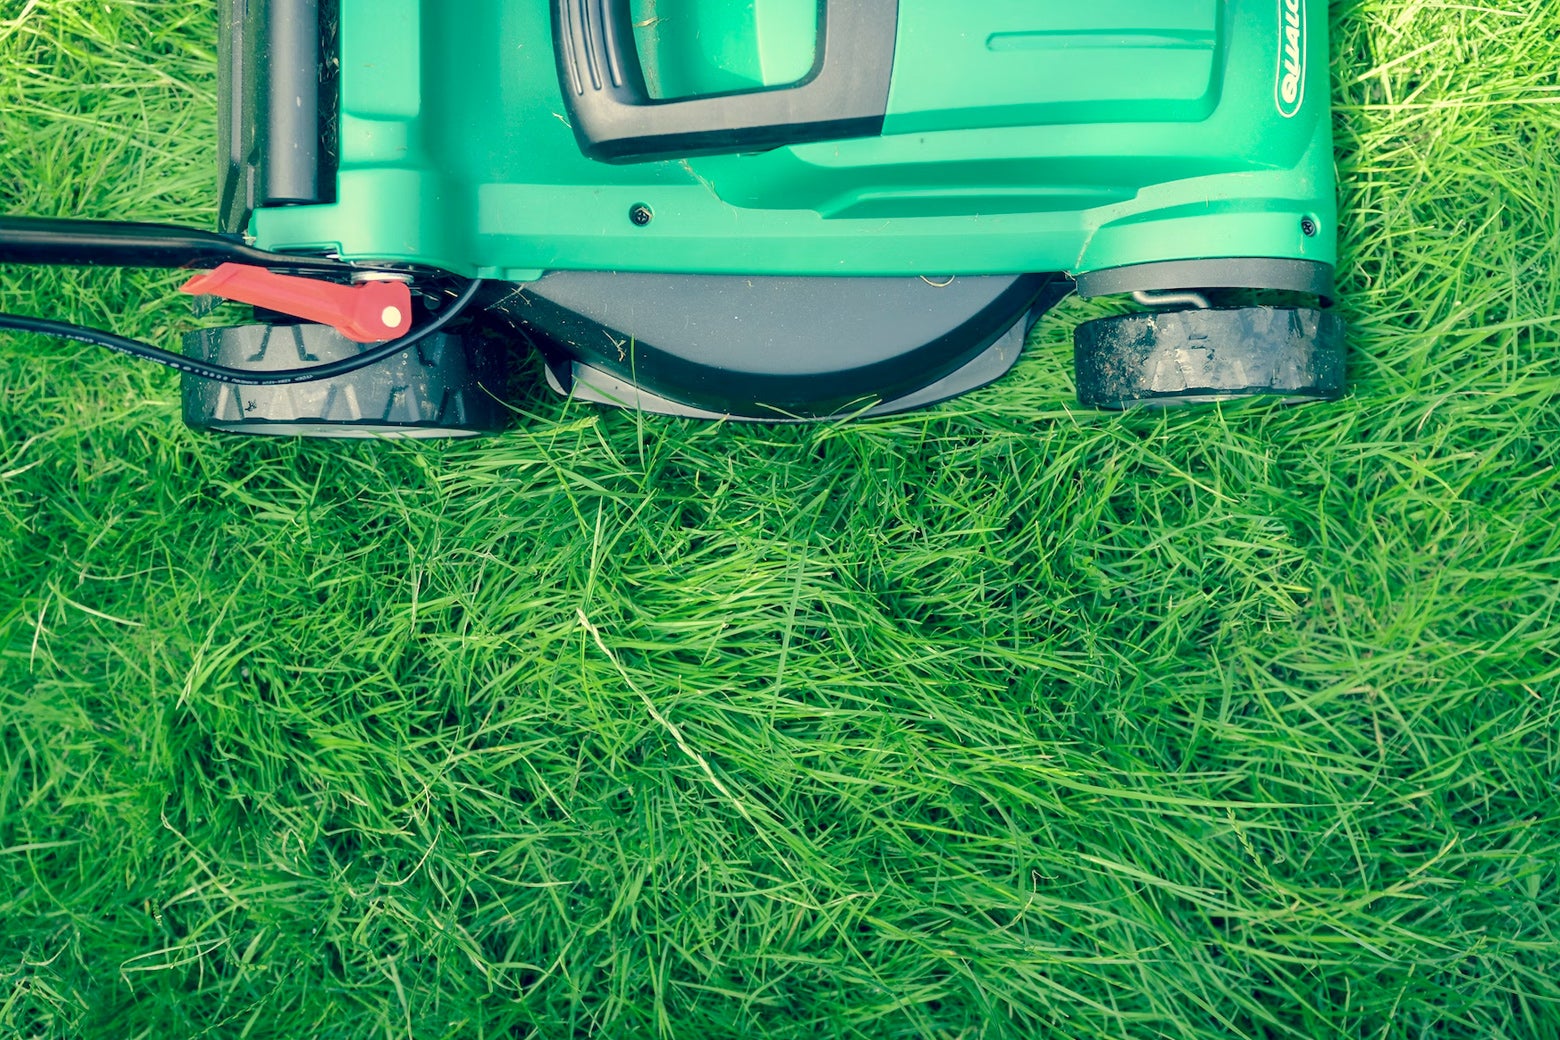 An overhead, slightly obscured view of a lawnmower rolling over a field of grass